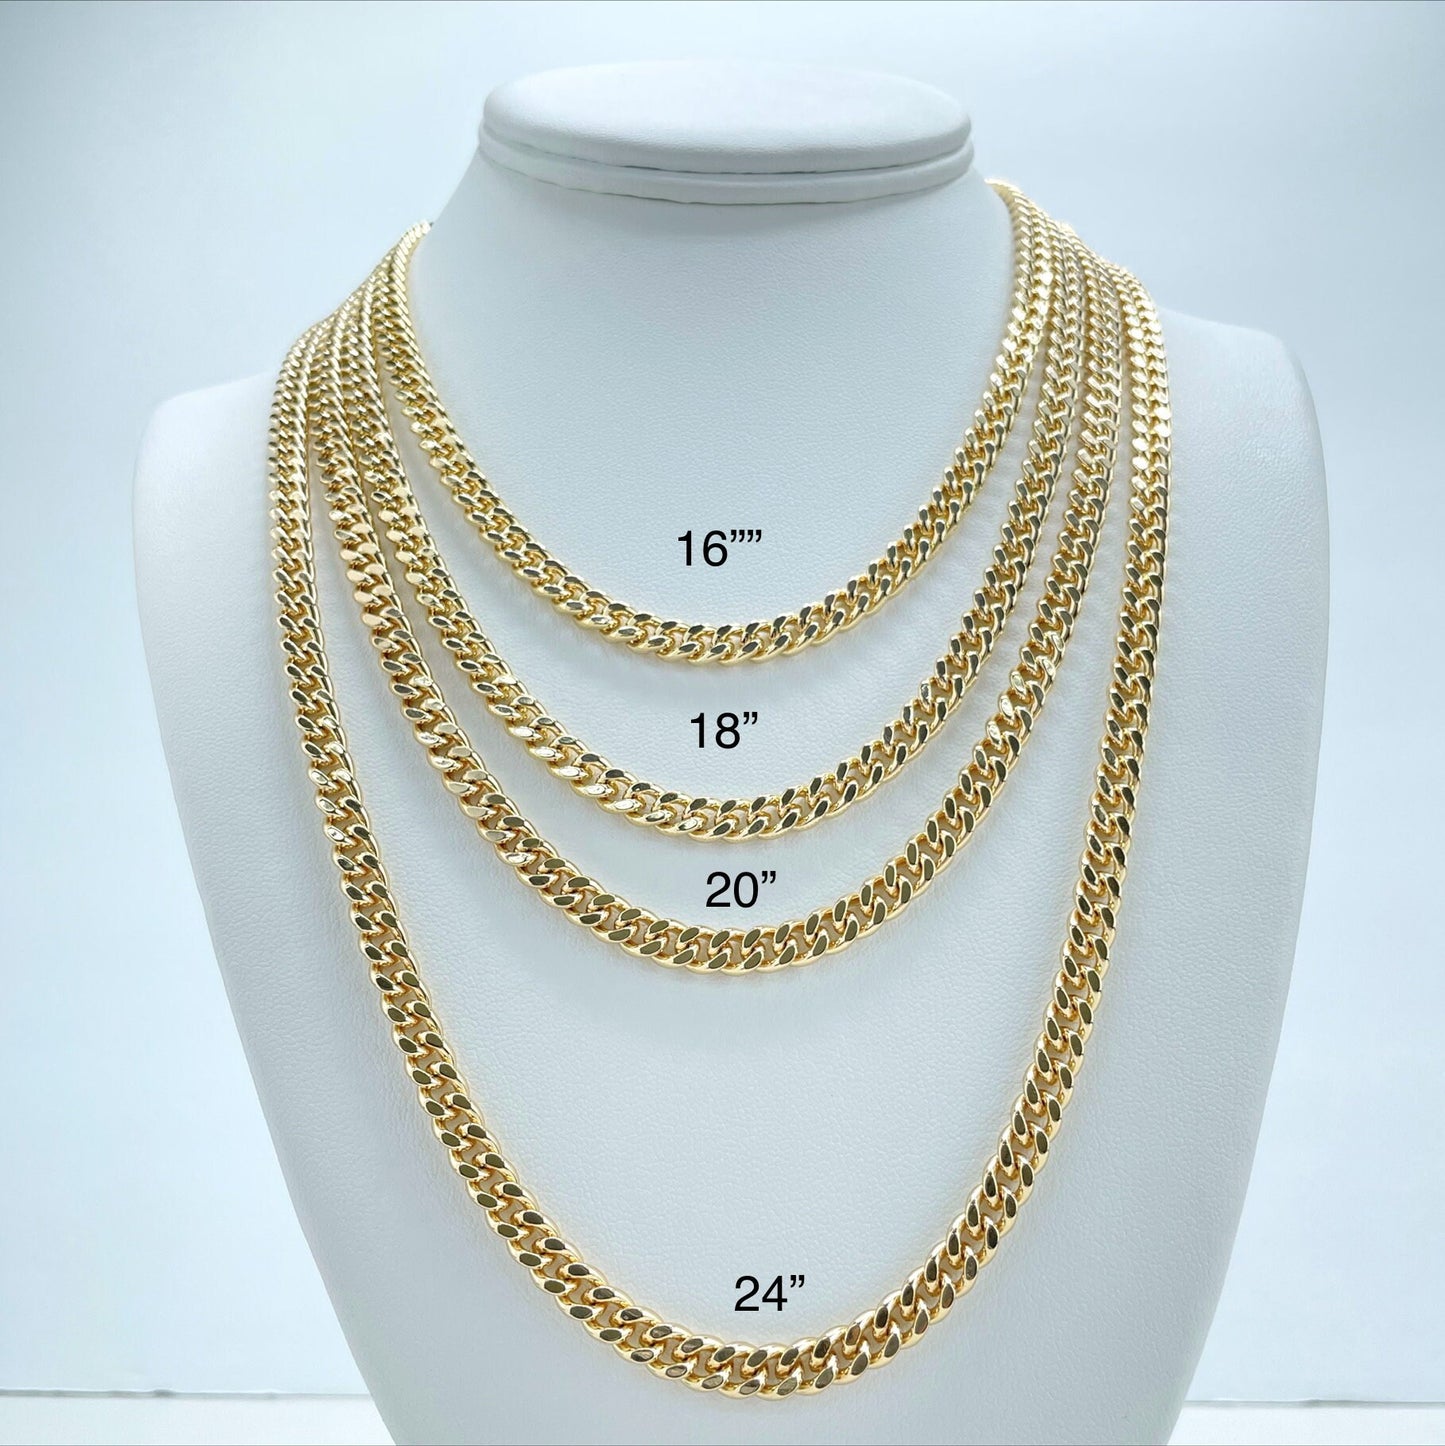 18k Gold Filled Cuban Link Chain 6mm or 7mm Unisex Curb Link Chain, Wholesale Jewelry Making Supplies